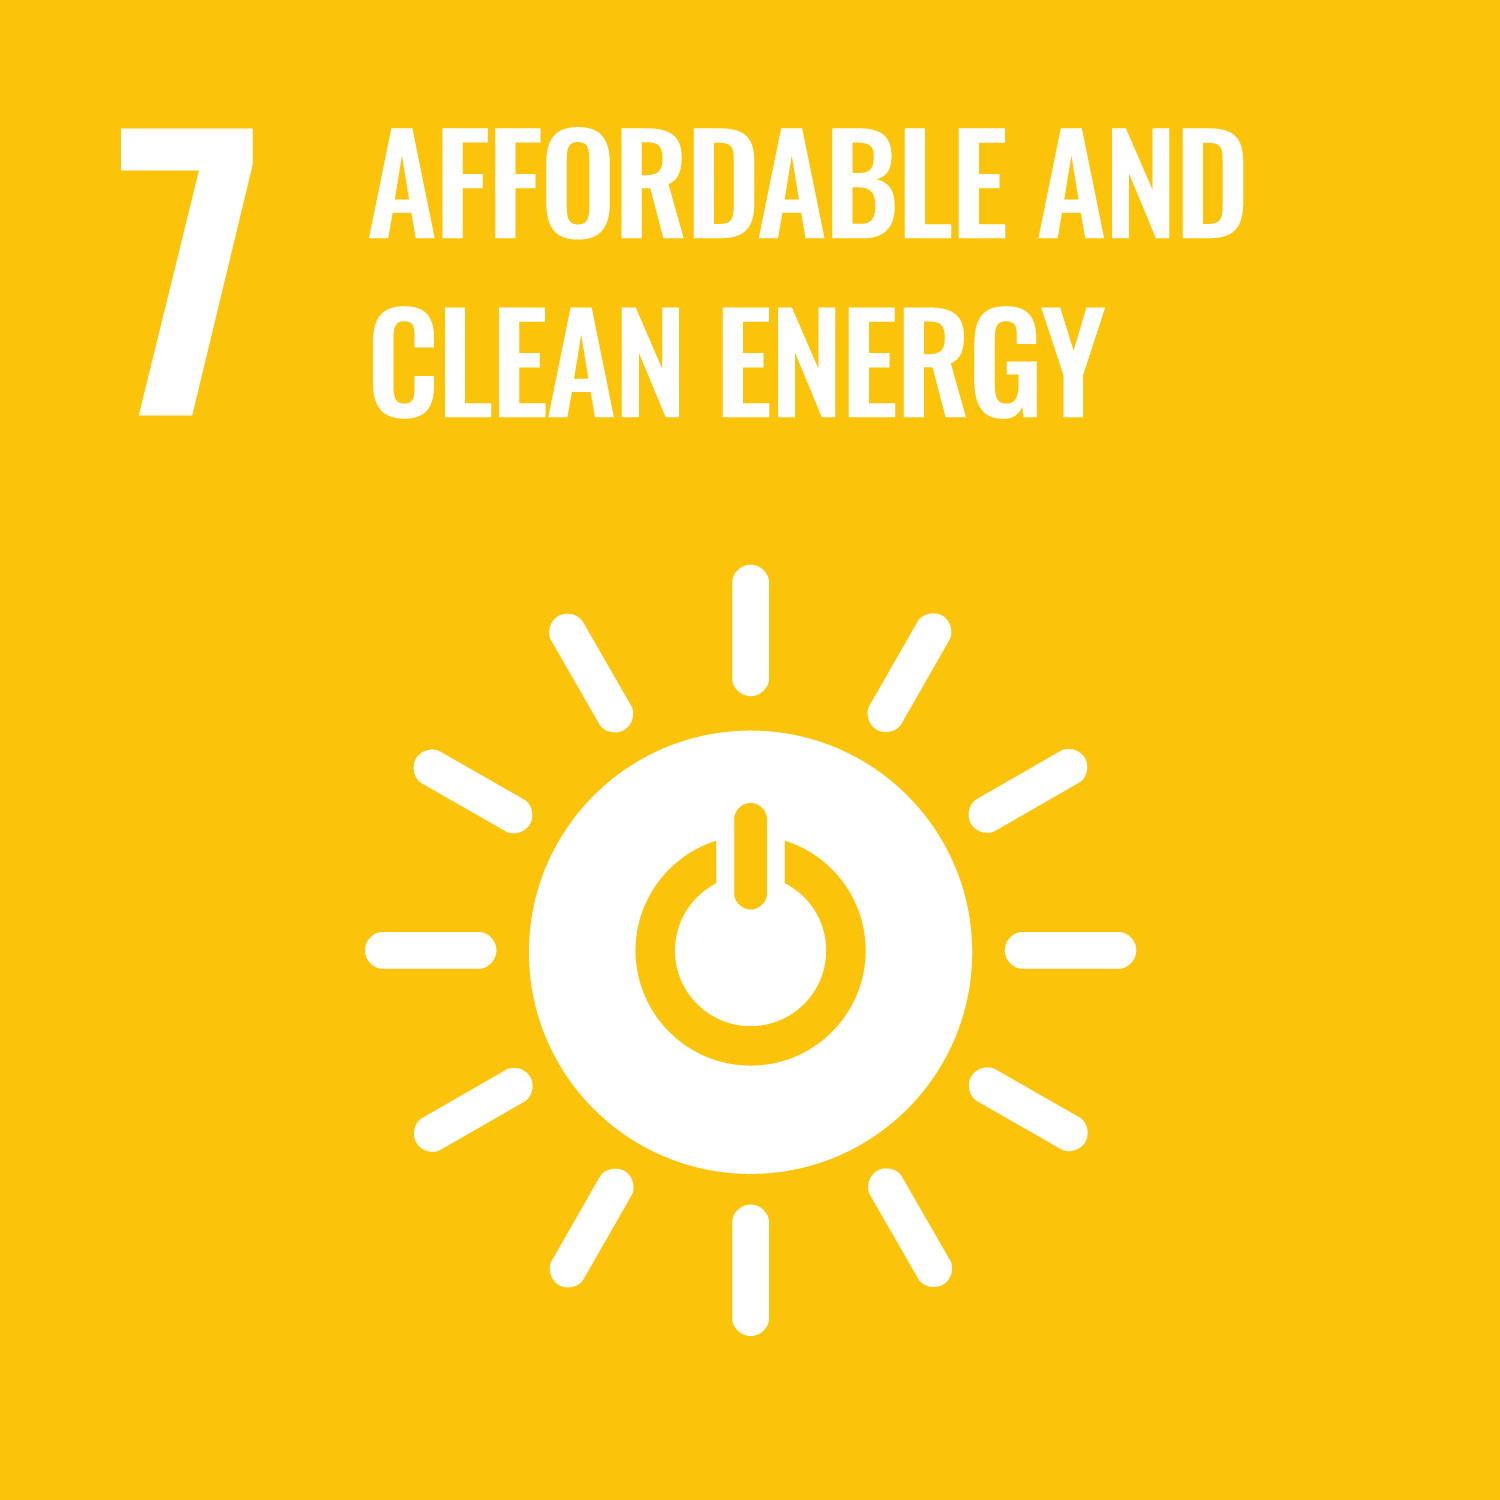 The official logo of the United Nations Sustainable Development Goal #7: Affordable and clean energy.